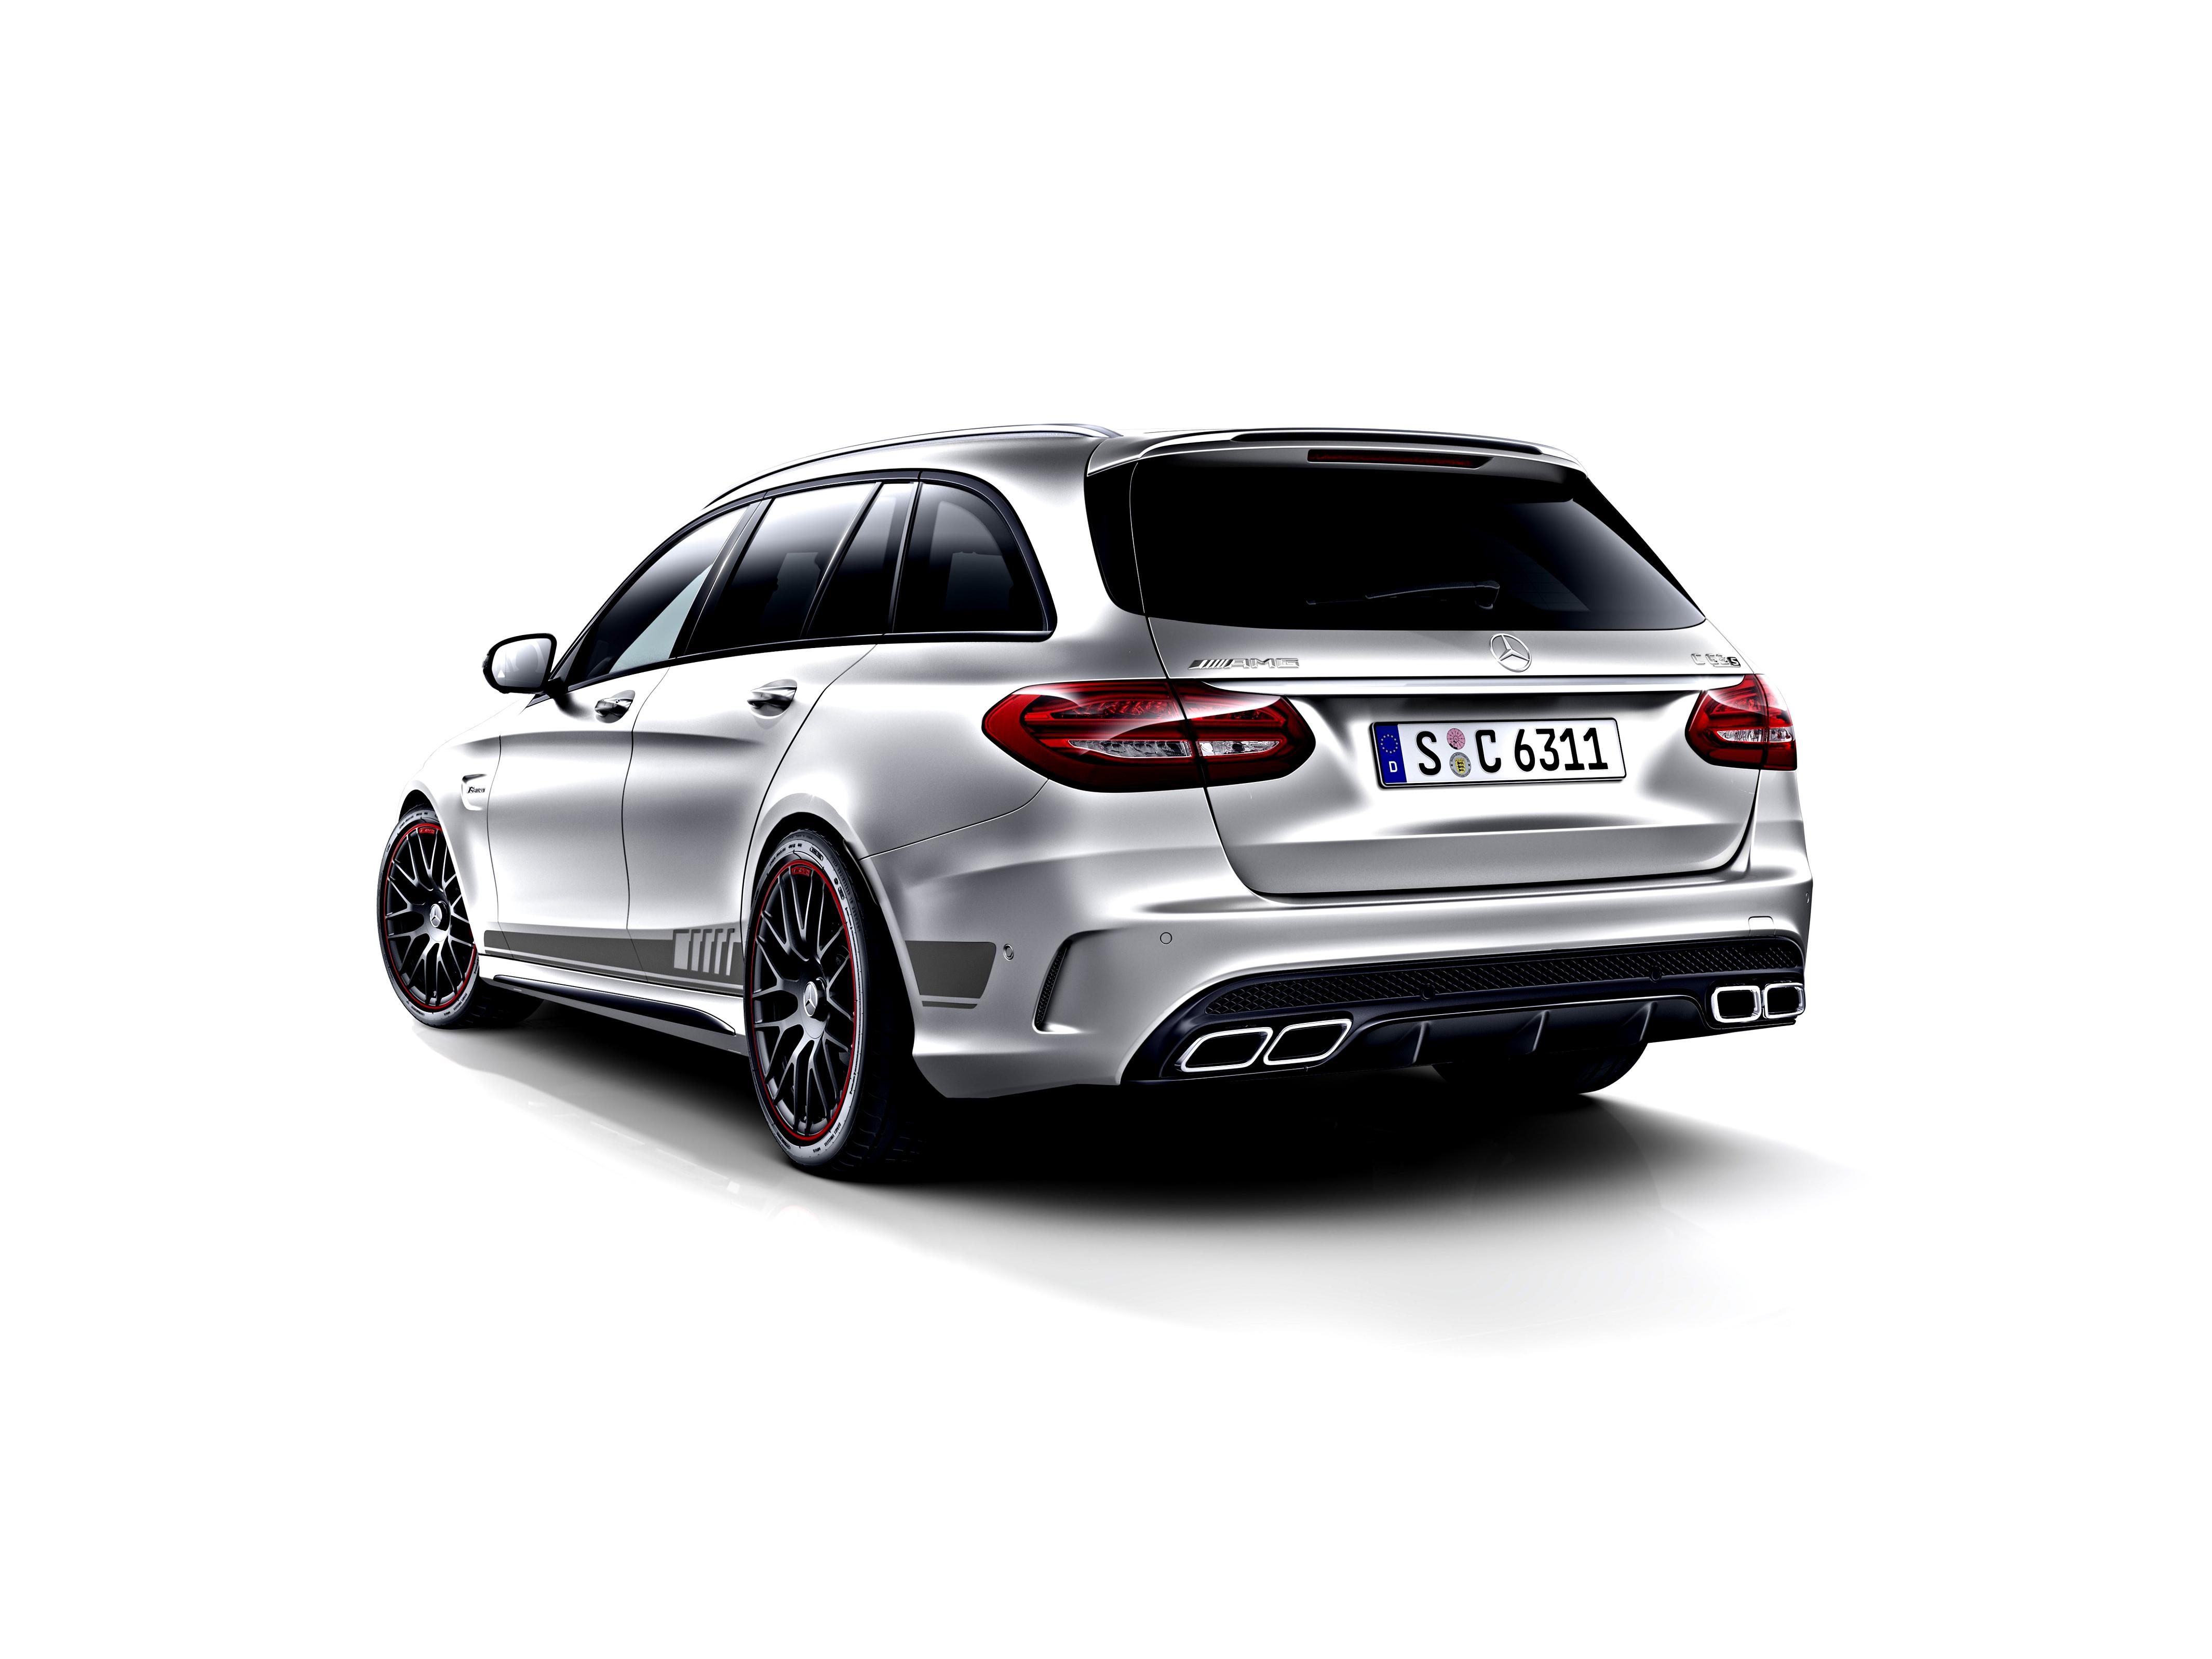 Mercedes Benz C 63 AMG T-Modell S205 2014 #39